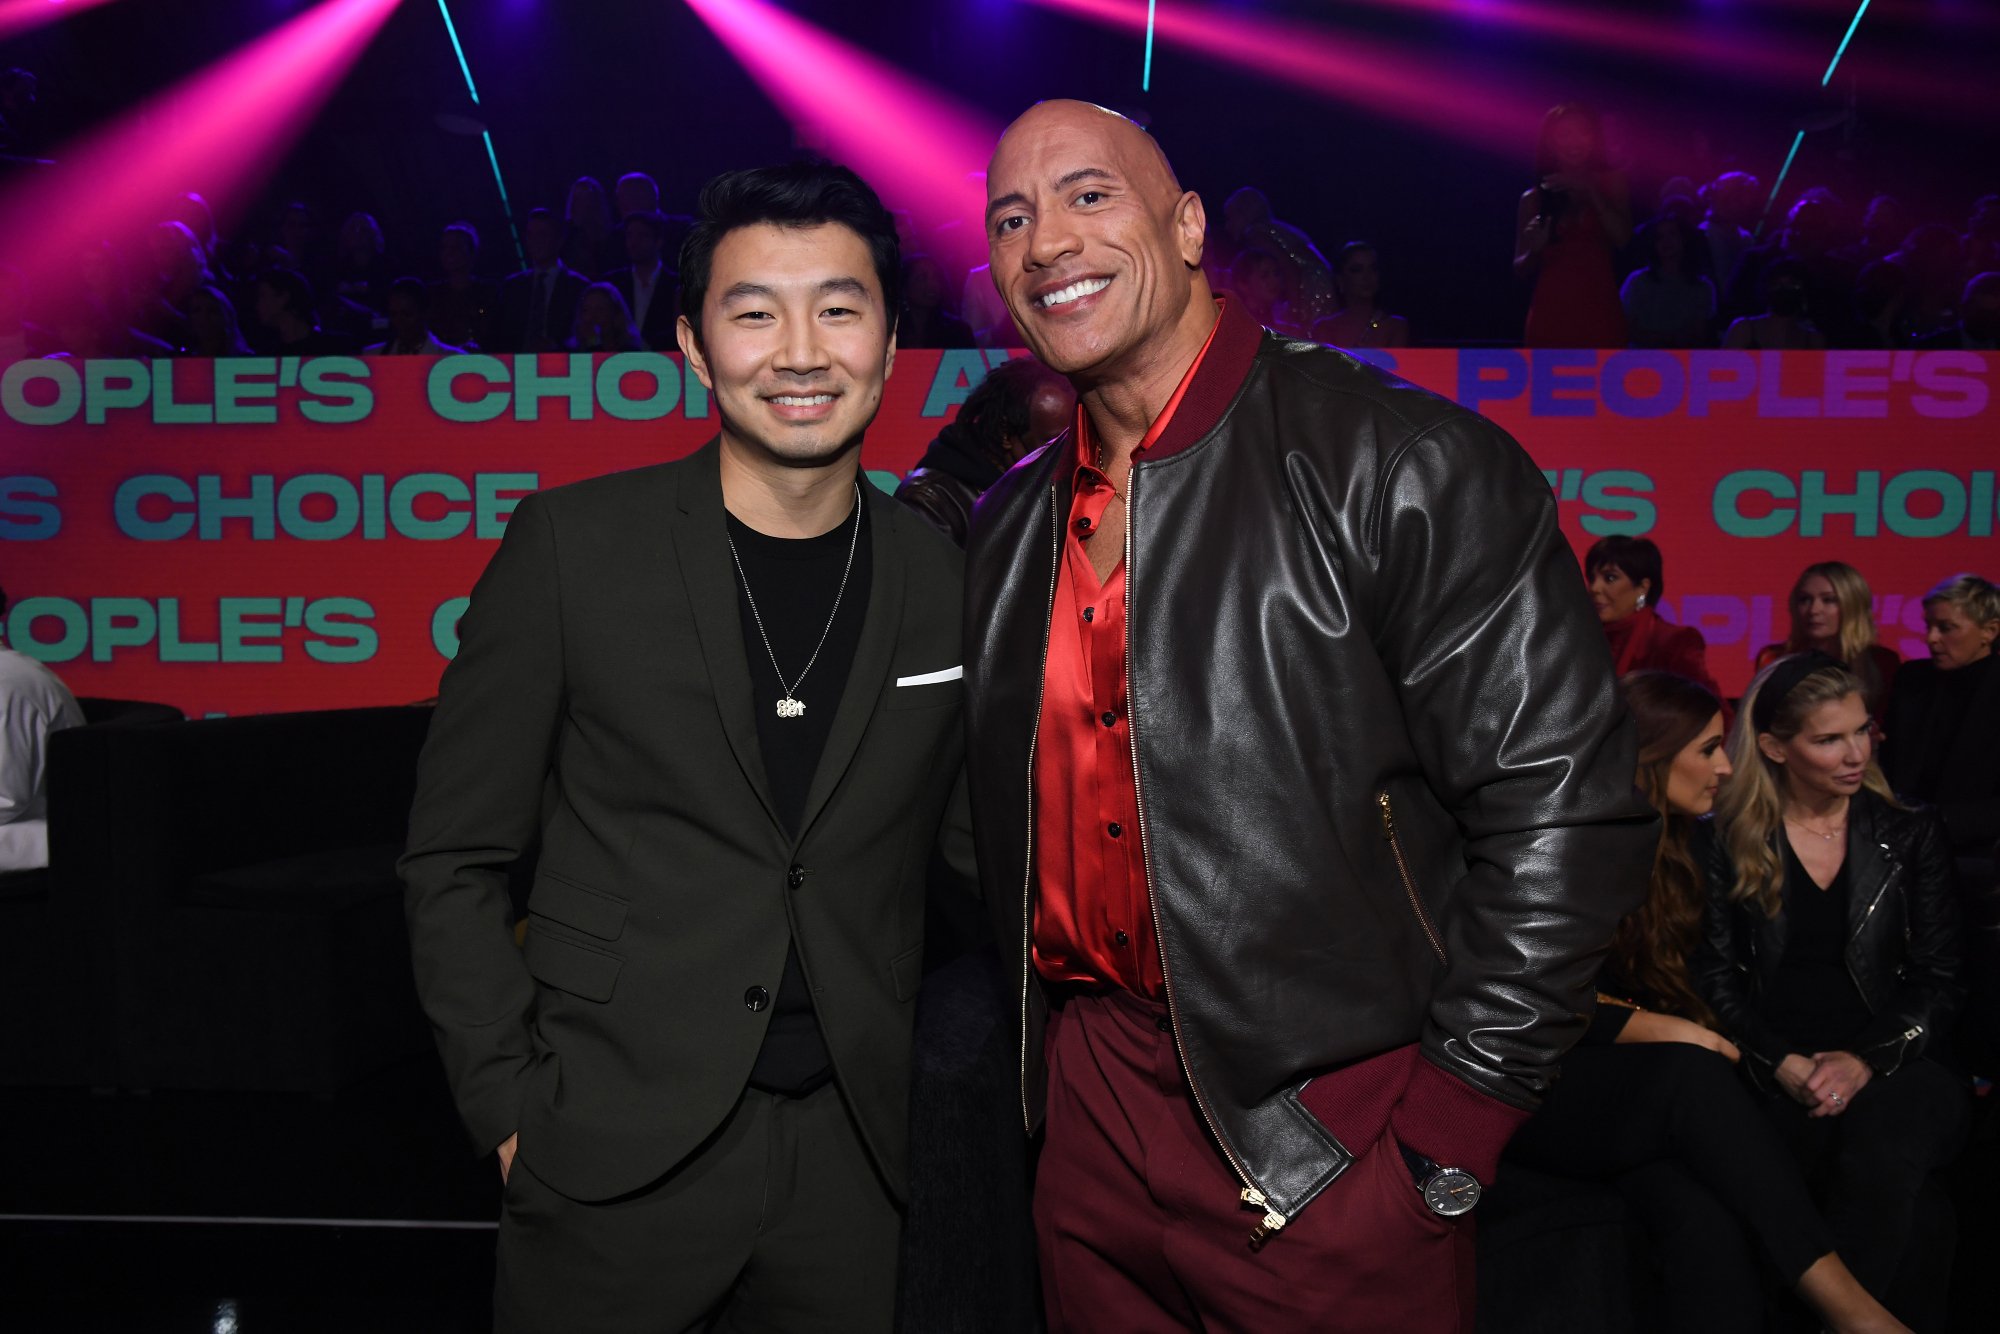 People's Choice Awards 2021 winners Simu Liu and Dwayne Johnson with their hand in their pockets